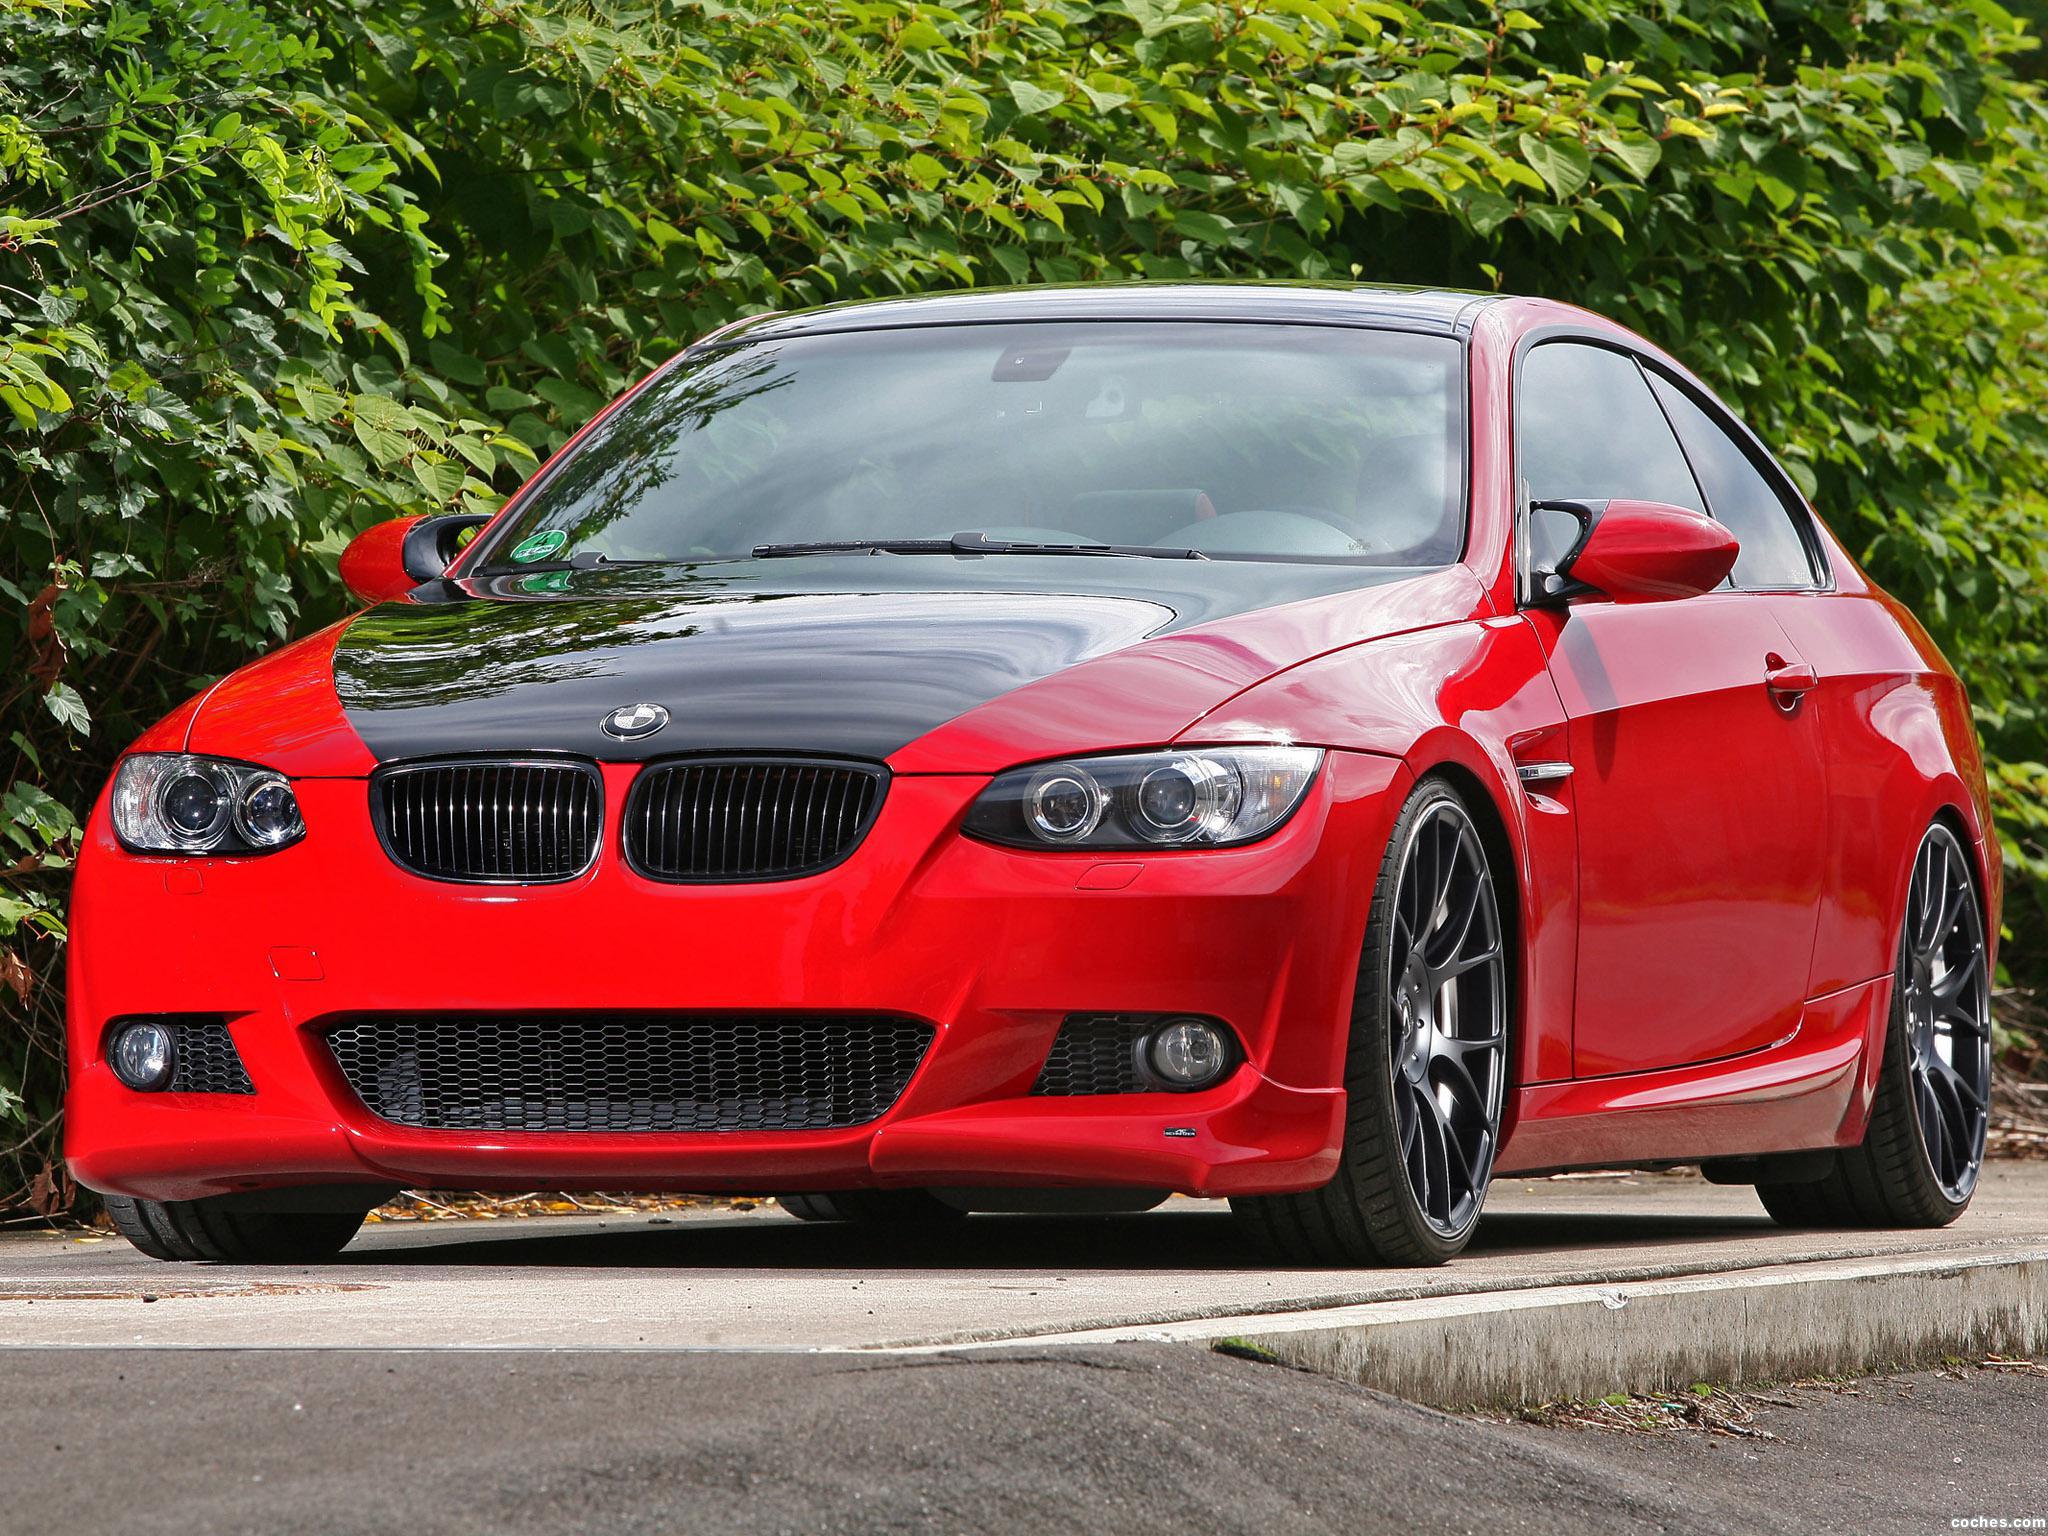 schmidt-revolution_bmw-3-series-coupe-tuning-concepts-e92-2012_r3.jpg